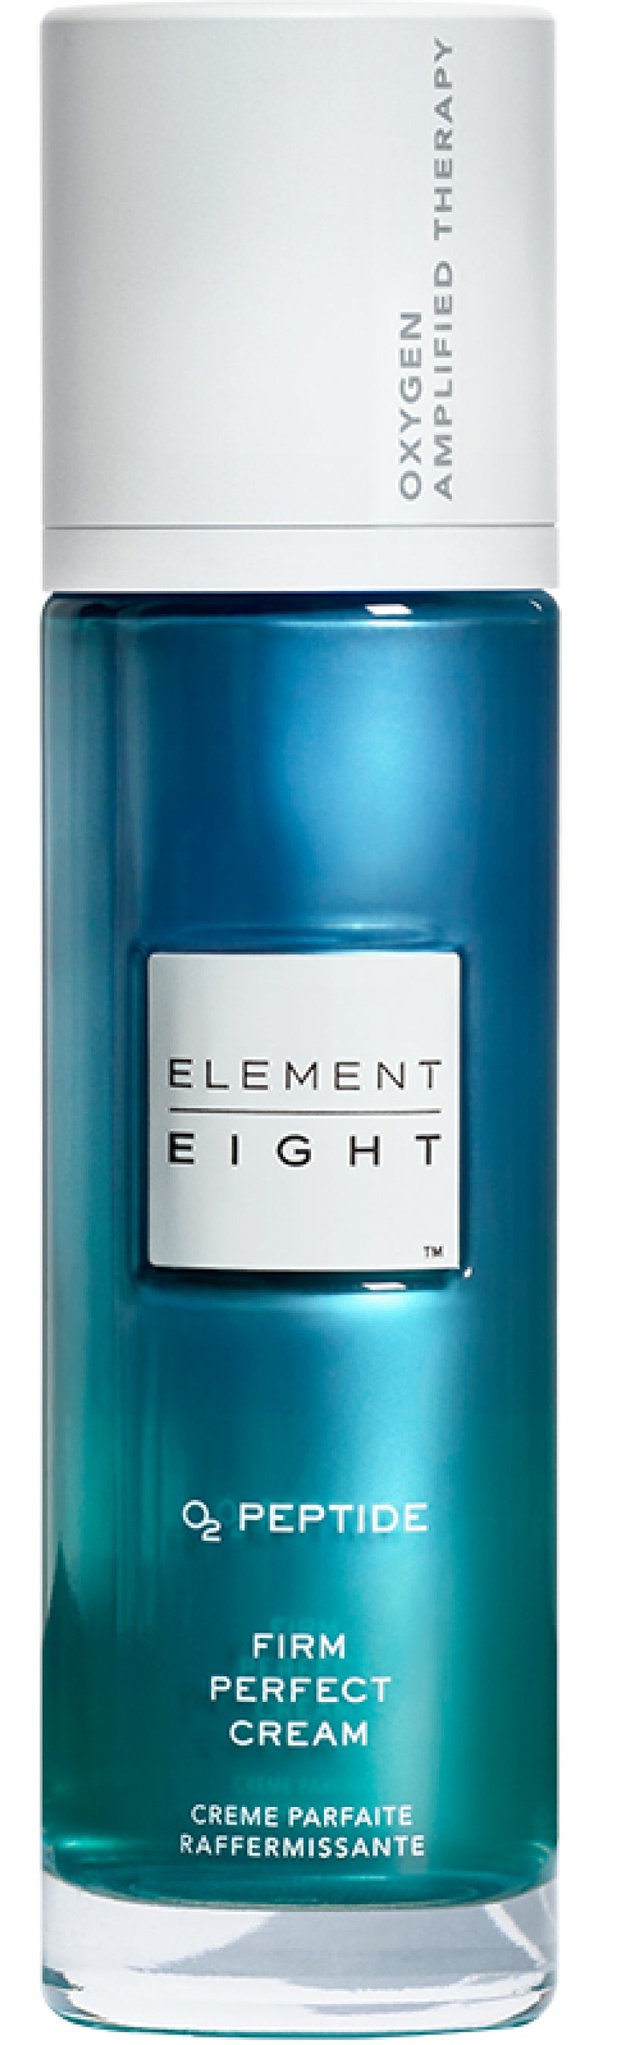 Element Eight O2 Peptide Firm Perfect Cream